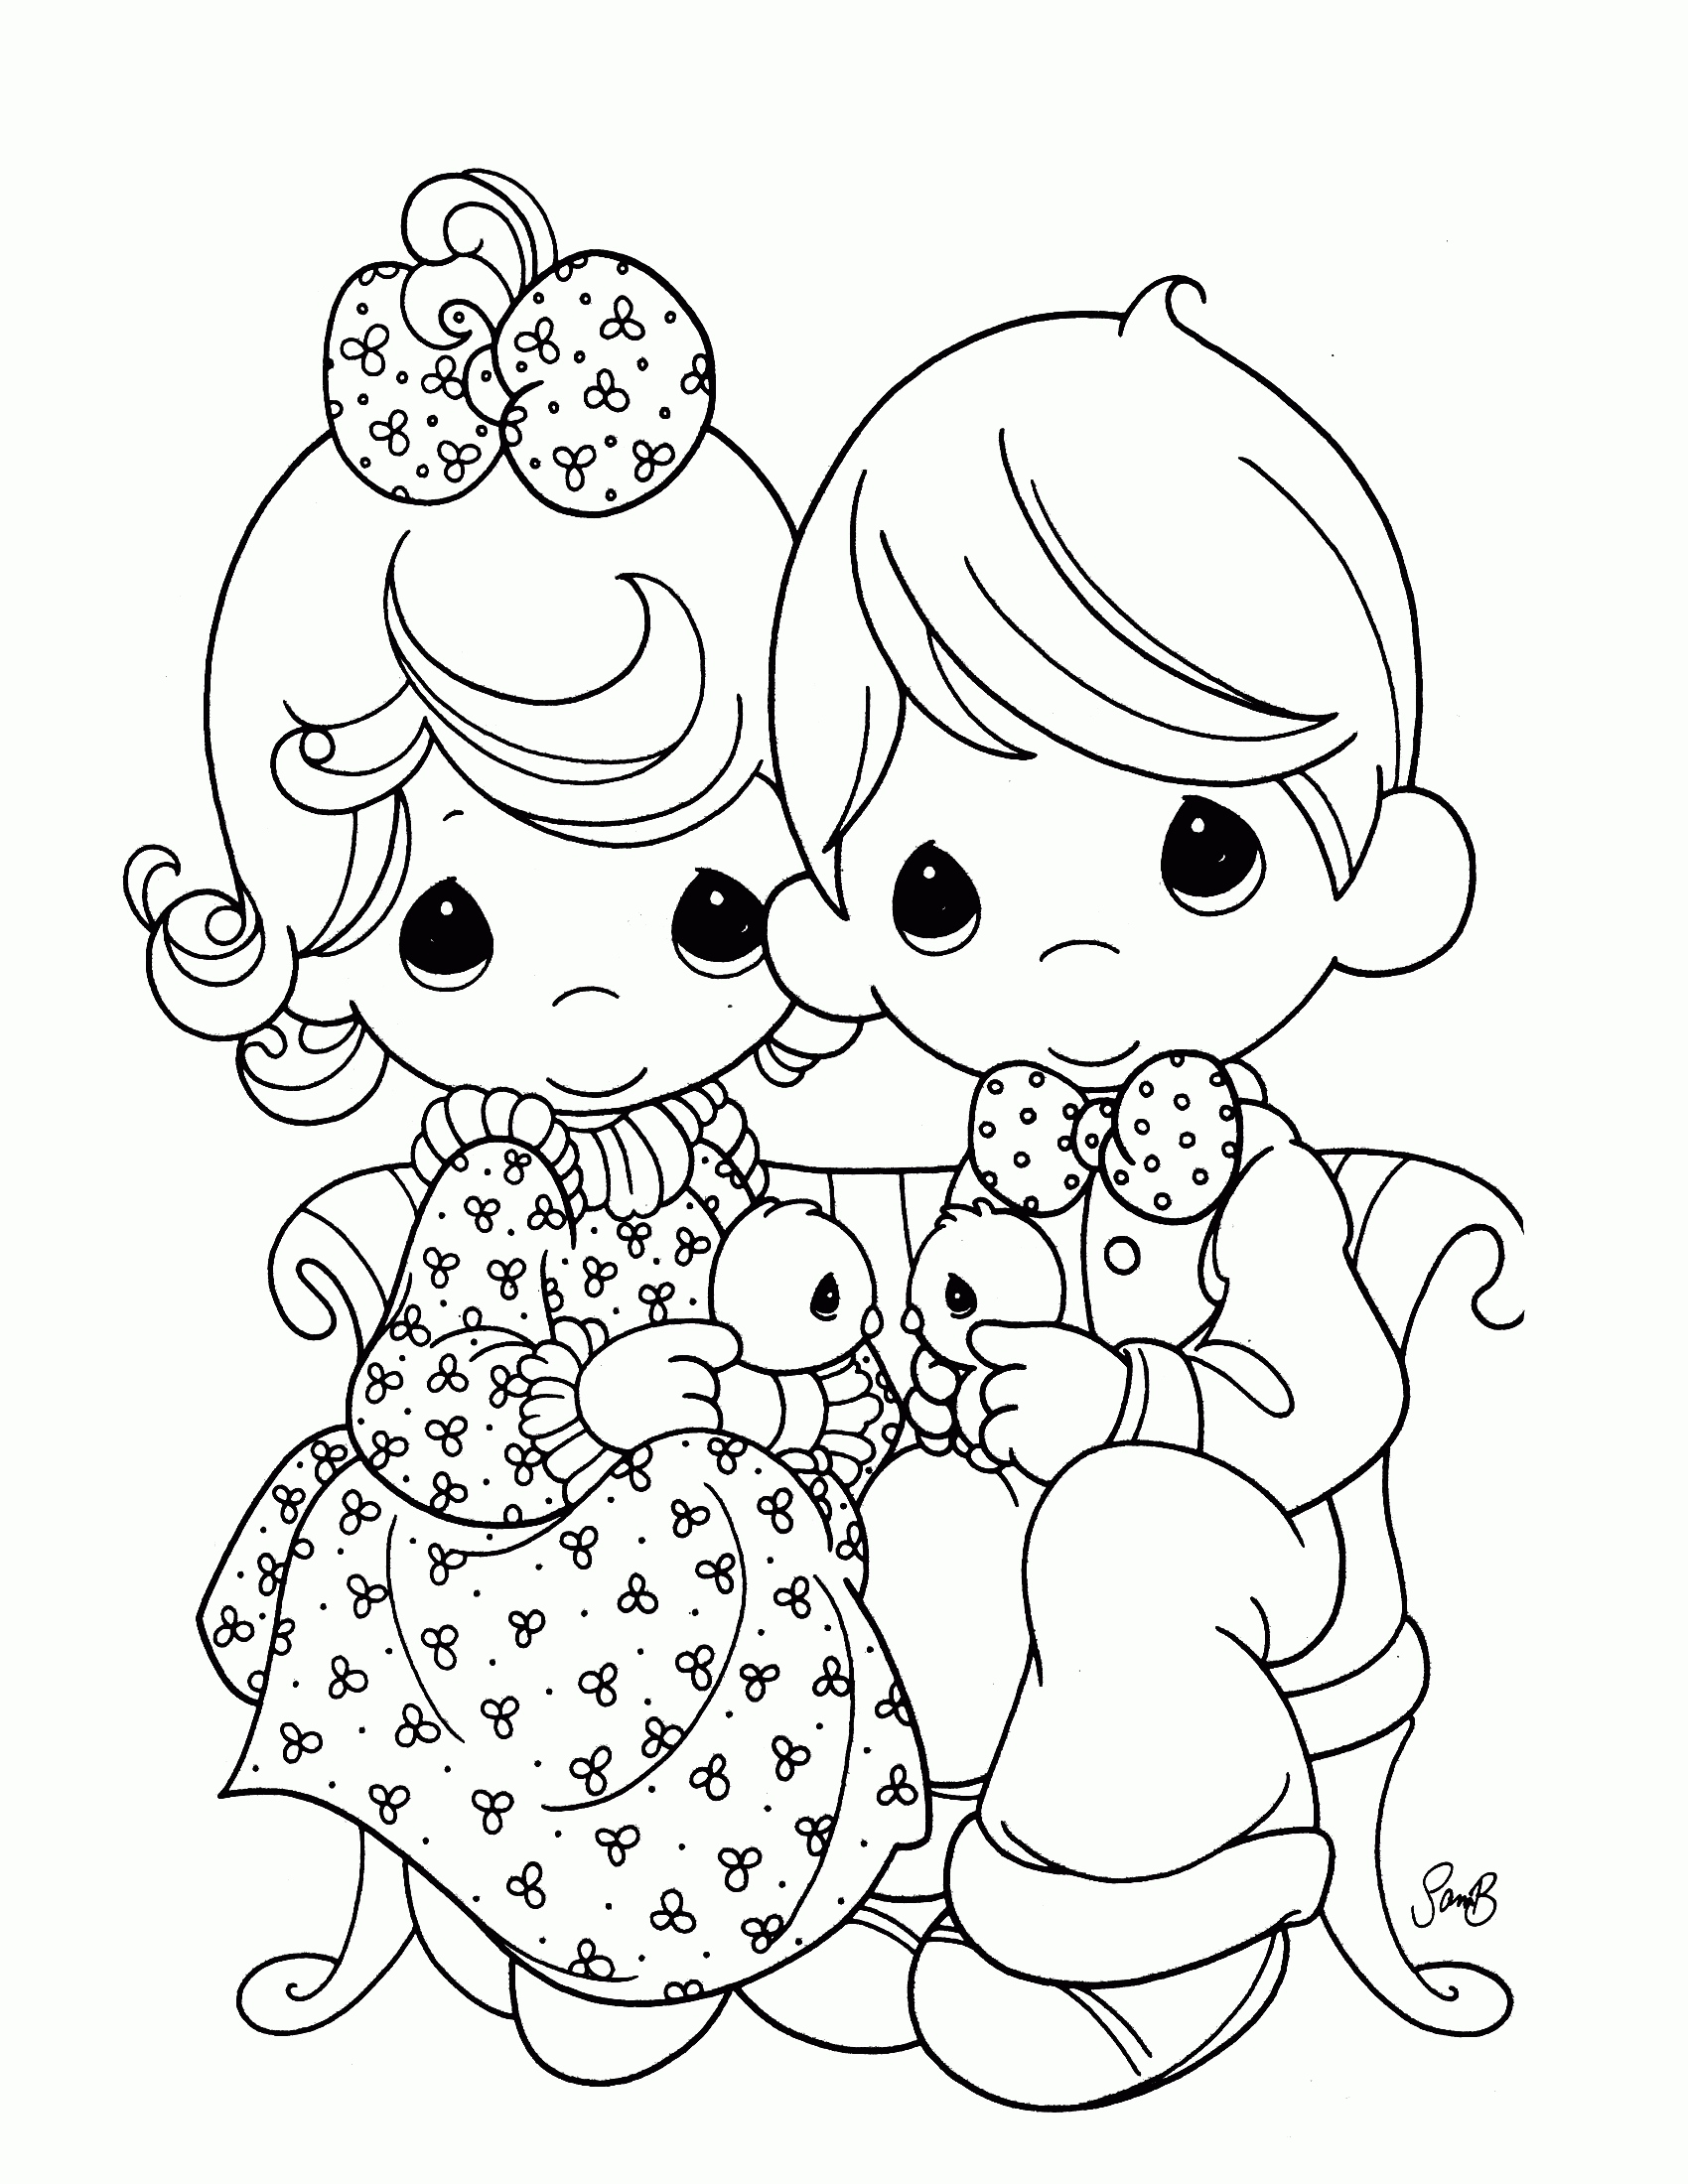 All Precious Moments Duck Coloring Pages - Coloring Pages For All Ages